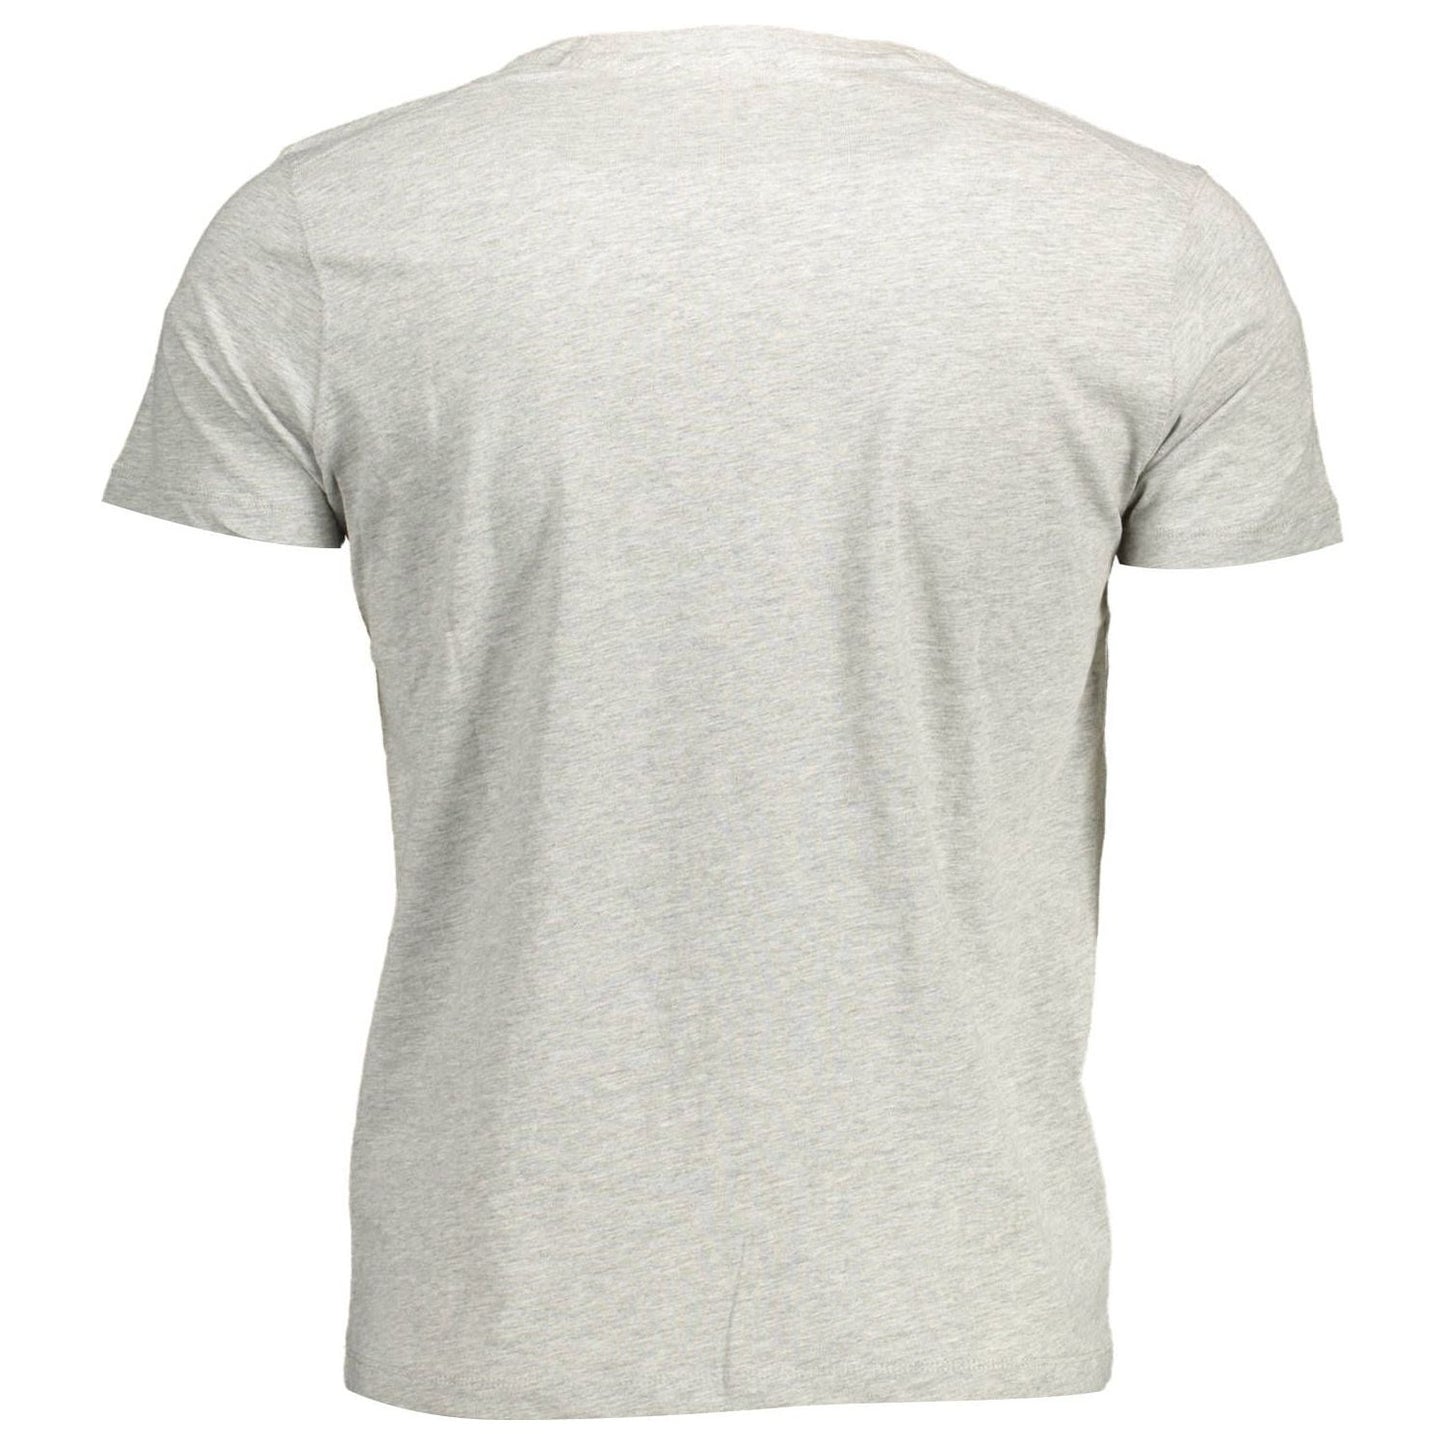 U.S. POLO ASSN. Essential Gray Embroidered Logo Tee essential-gray-embroidered-logo-tee